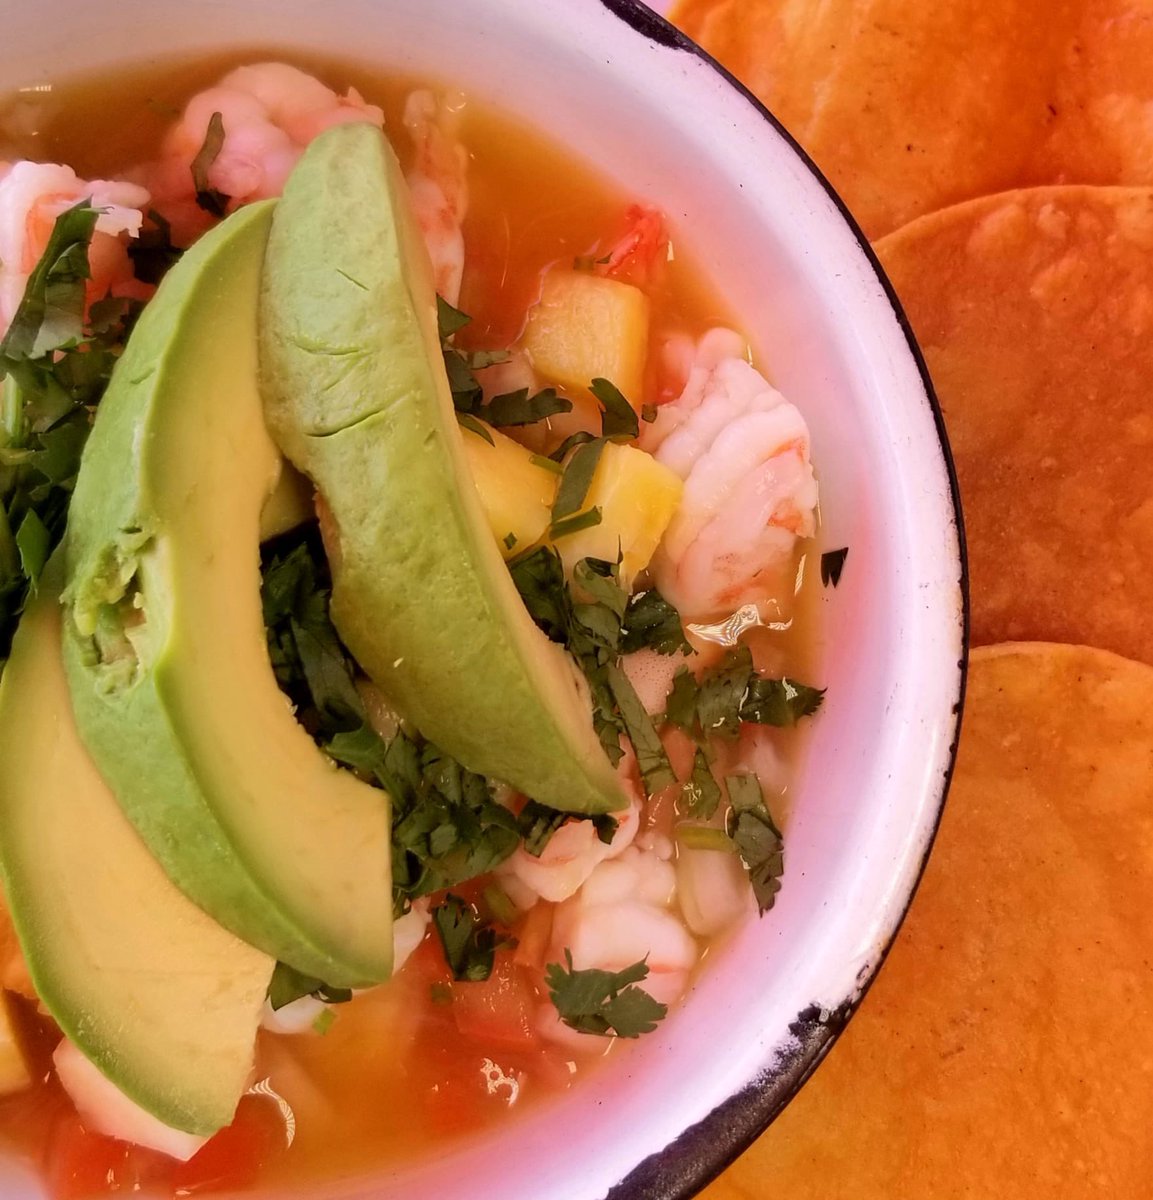 Ceviche con piña!! A fresh, tropical combination. Once named the 'King of Fruit', the tropical flavors make this ceviche one of a kind. 
#Freshingredients 
#MexicoCityinHouston 
#Cuchara